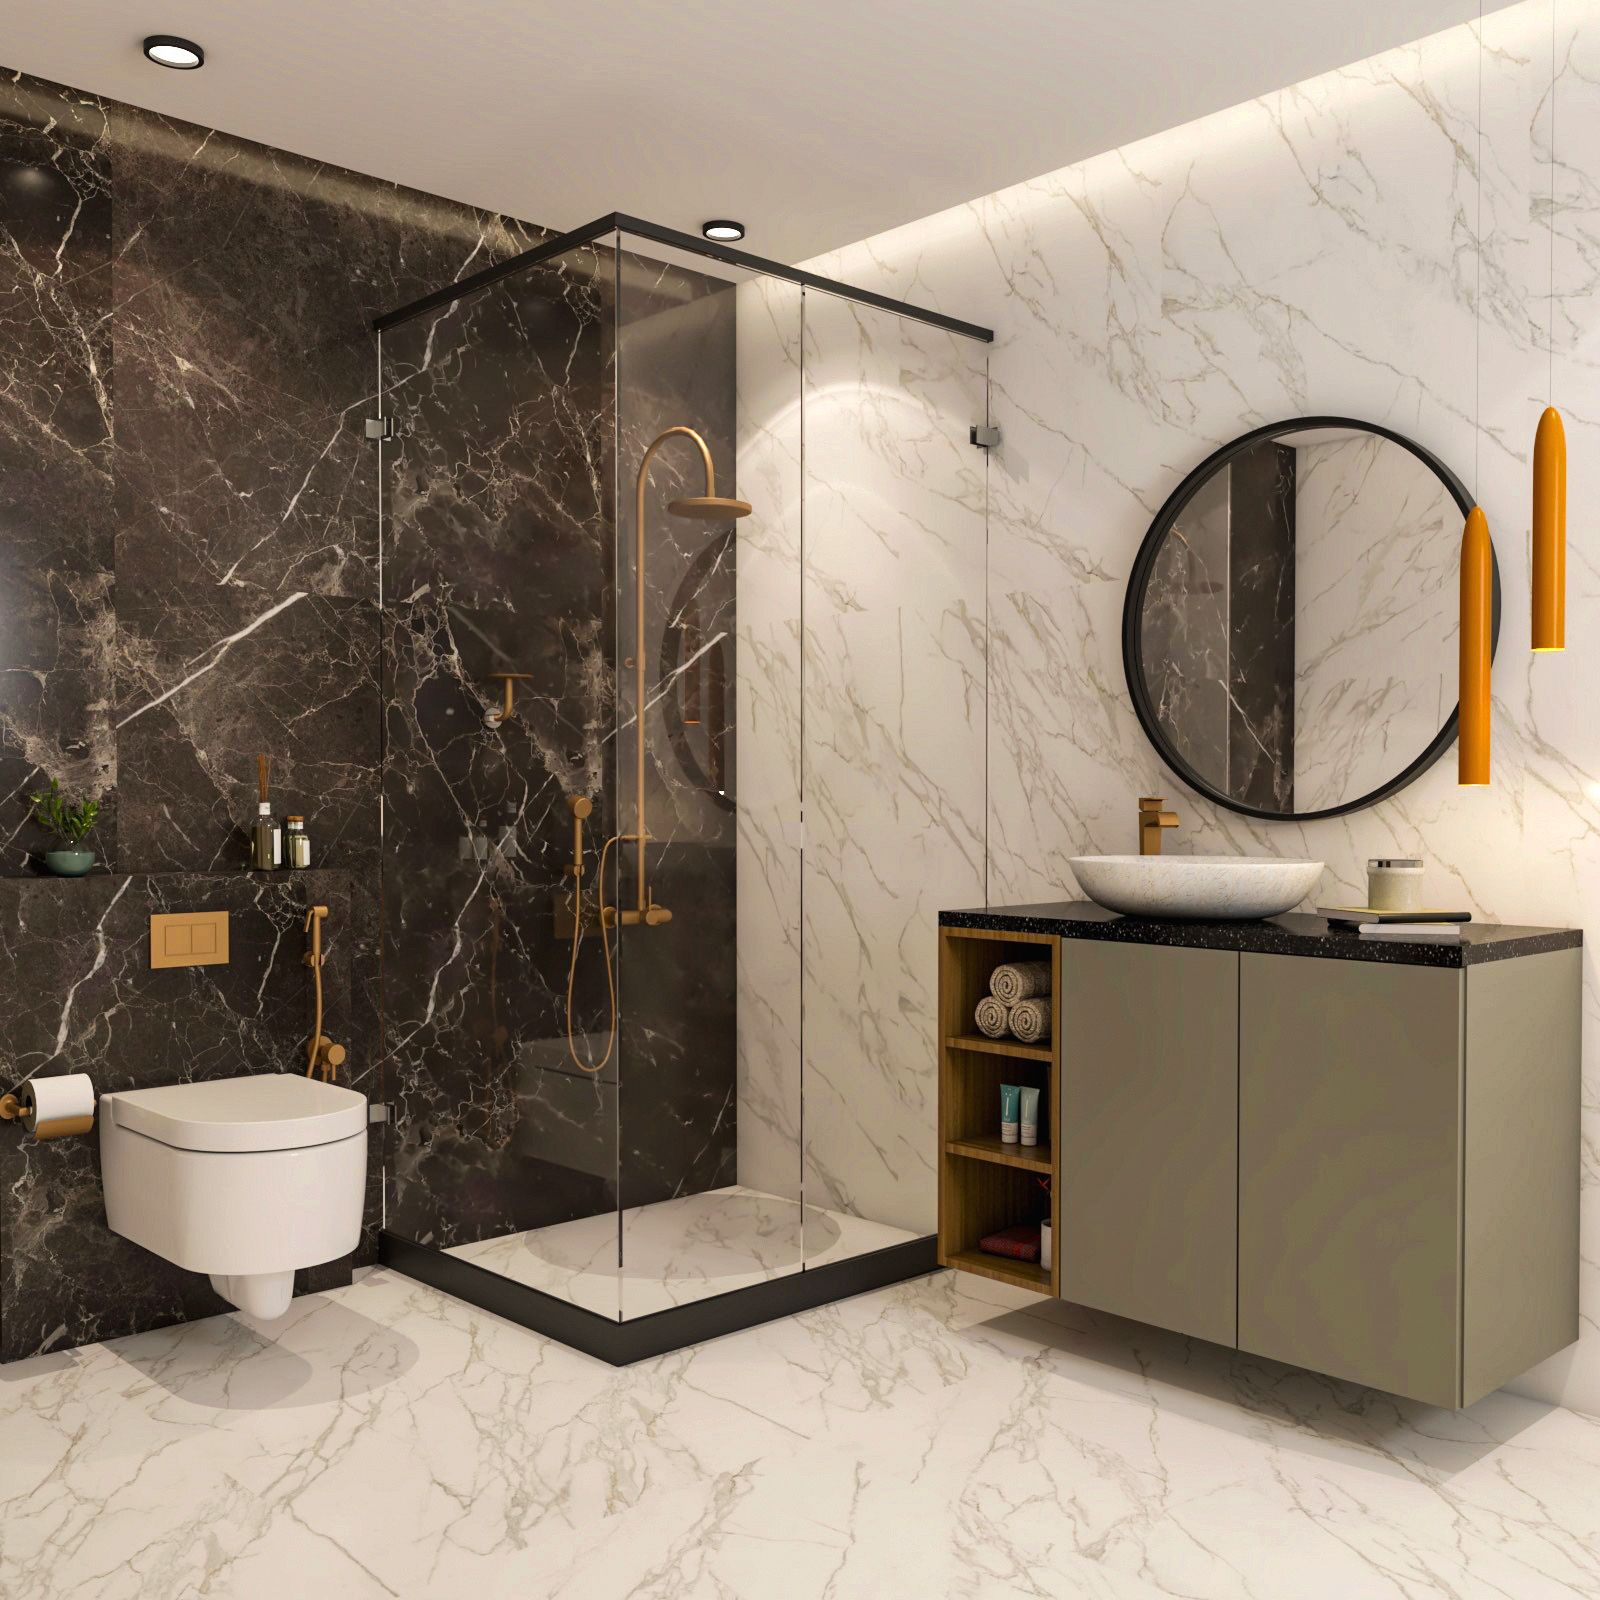 Contemporary Black And White Bathroom Design With Grey Bathroom Cabinet And Marble Countertop